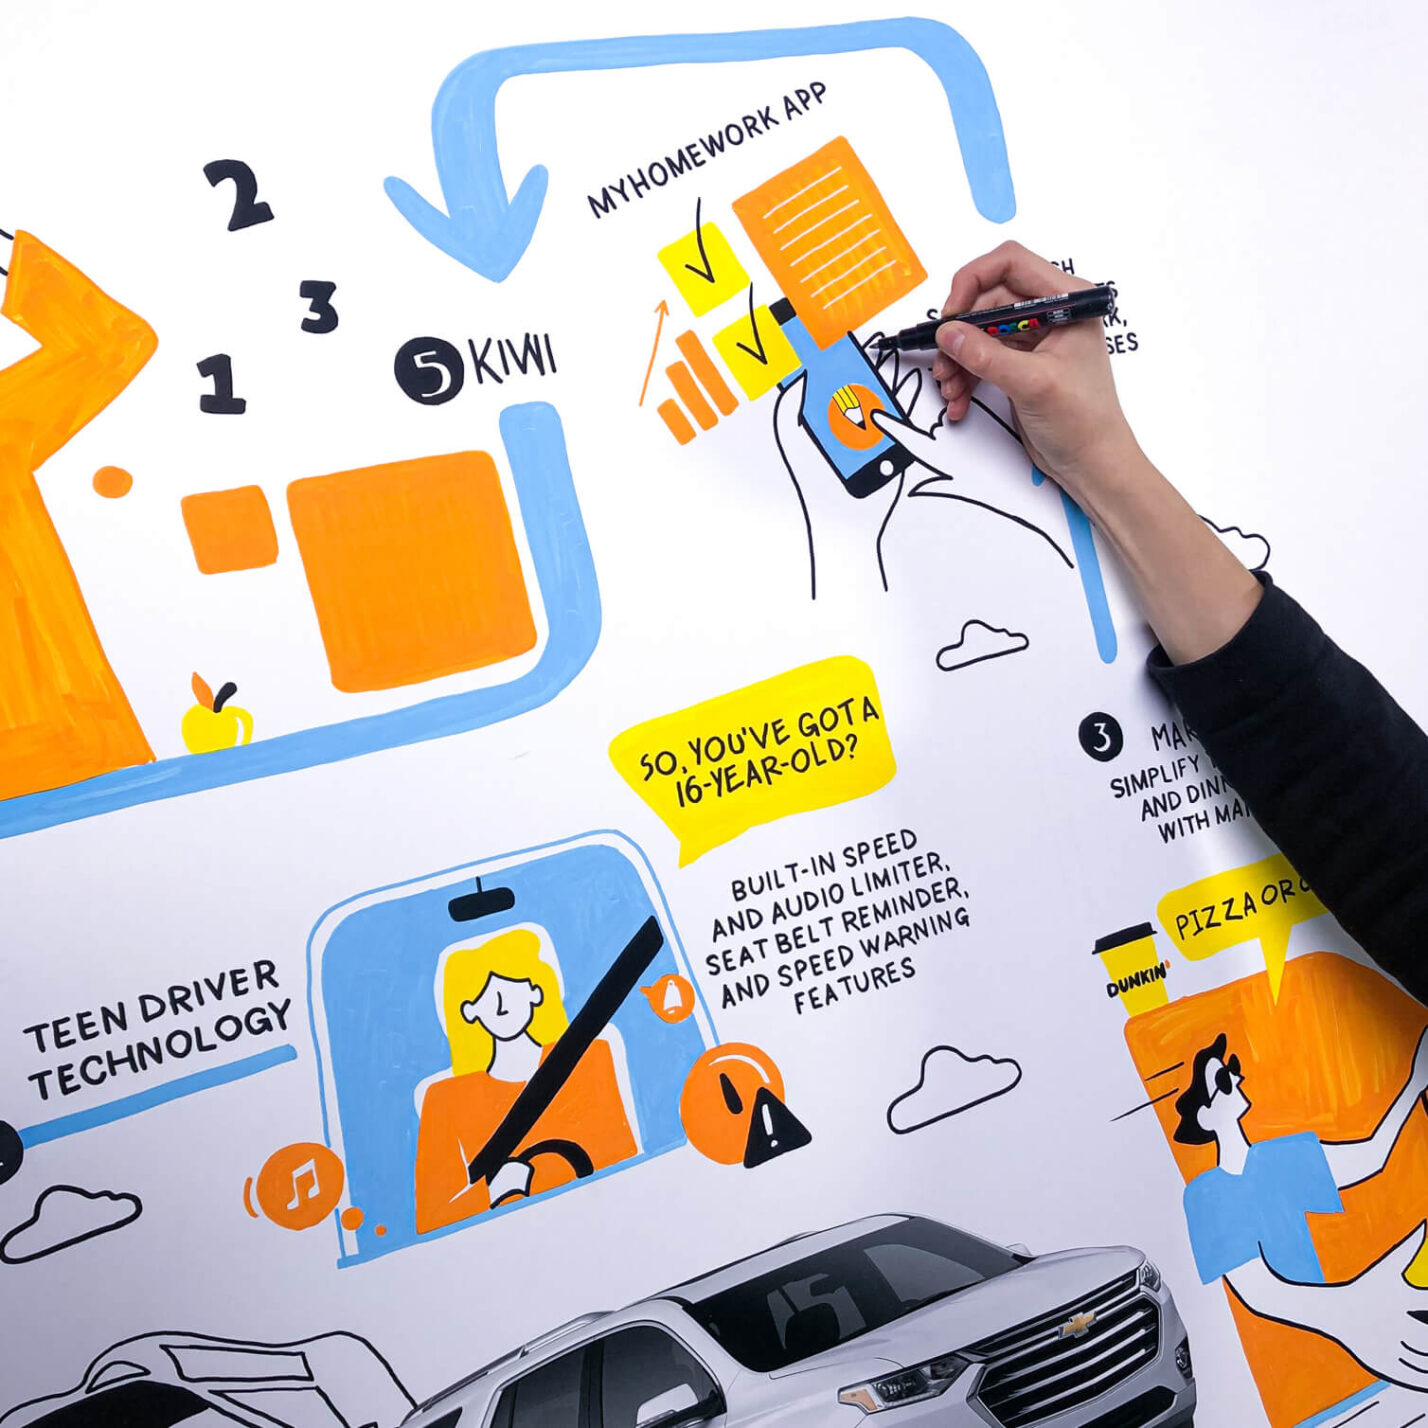 Live Scribing for Chevrolet blog post on new vehicle features